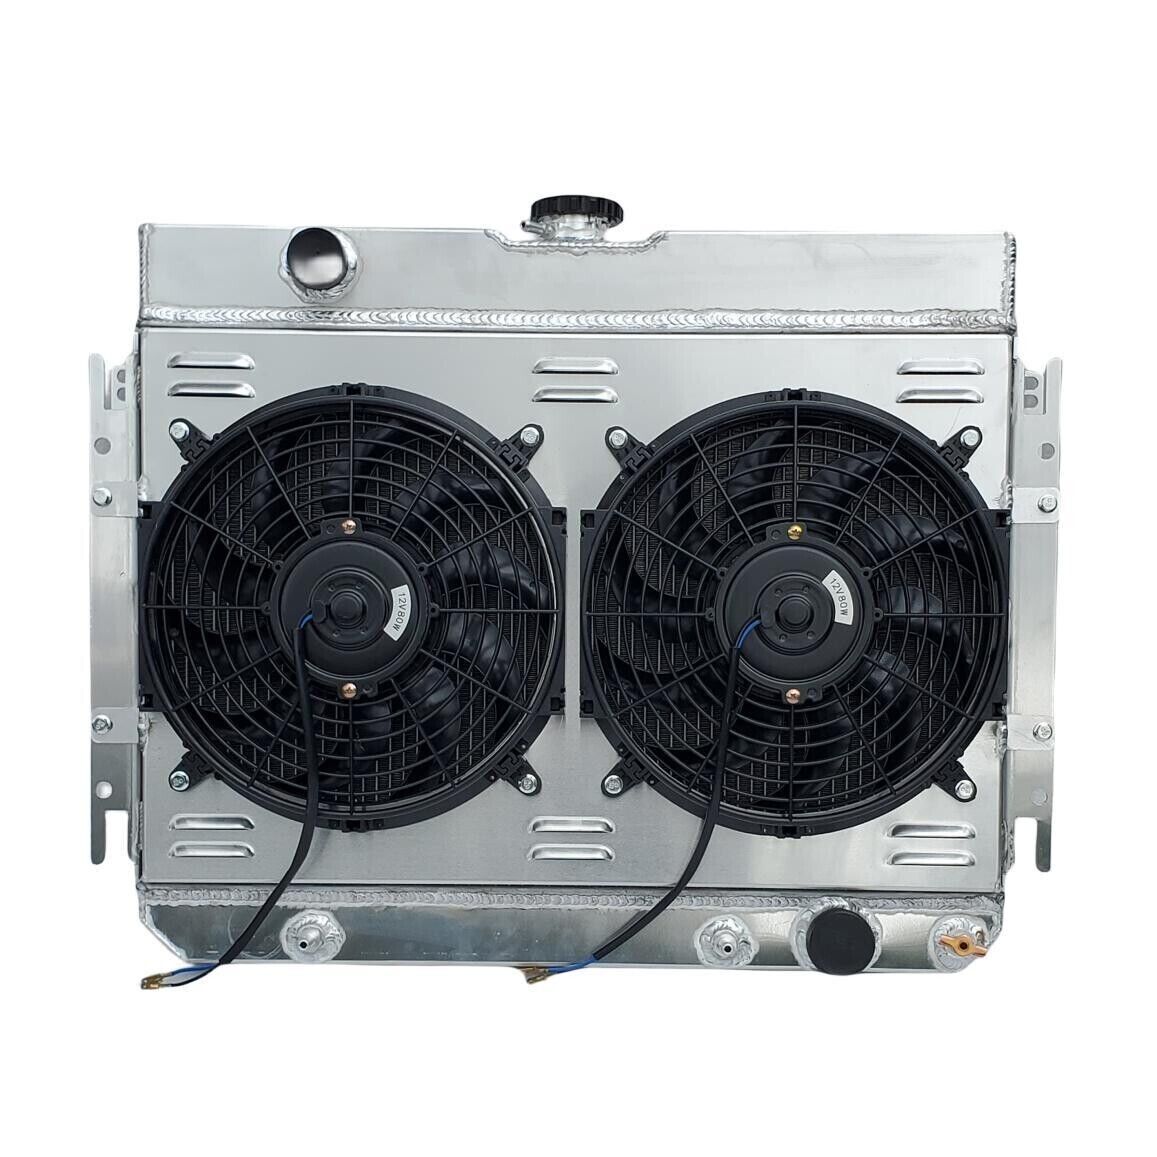 4Row Radiator&Shroud Fan For 1963-68 1964 Chevy Impala Bel Air Chevelle Biscayne